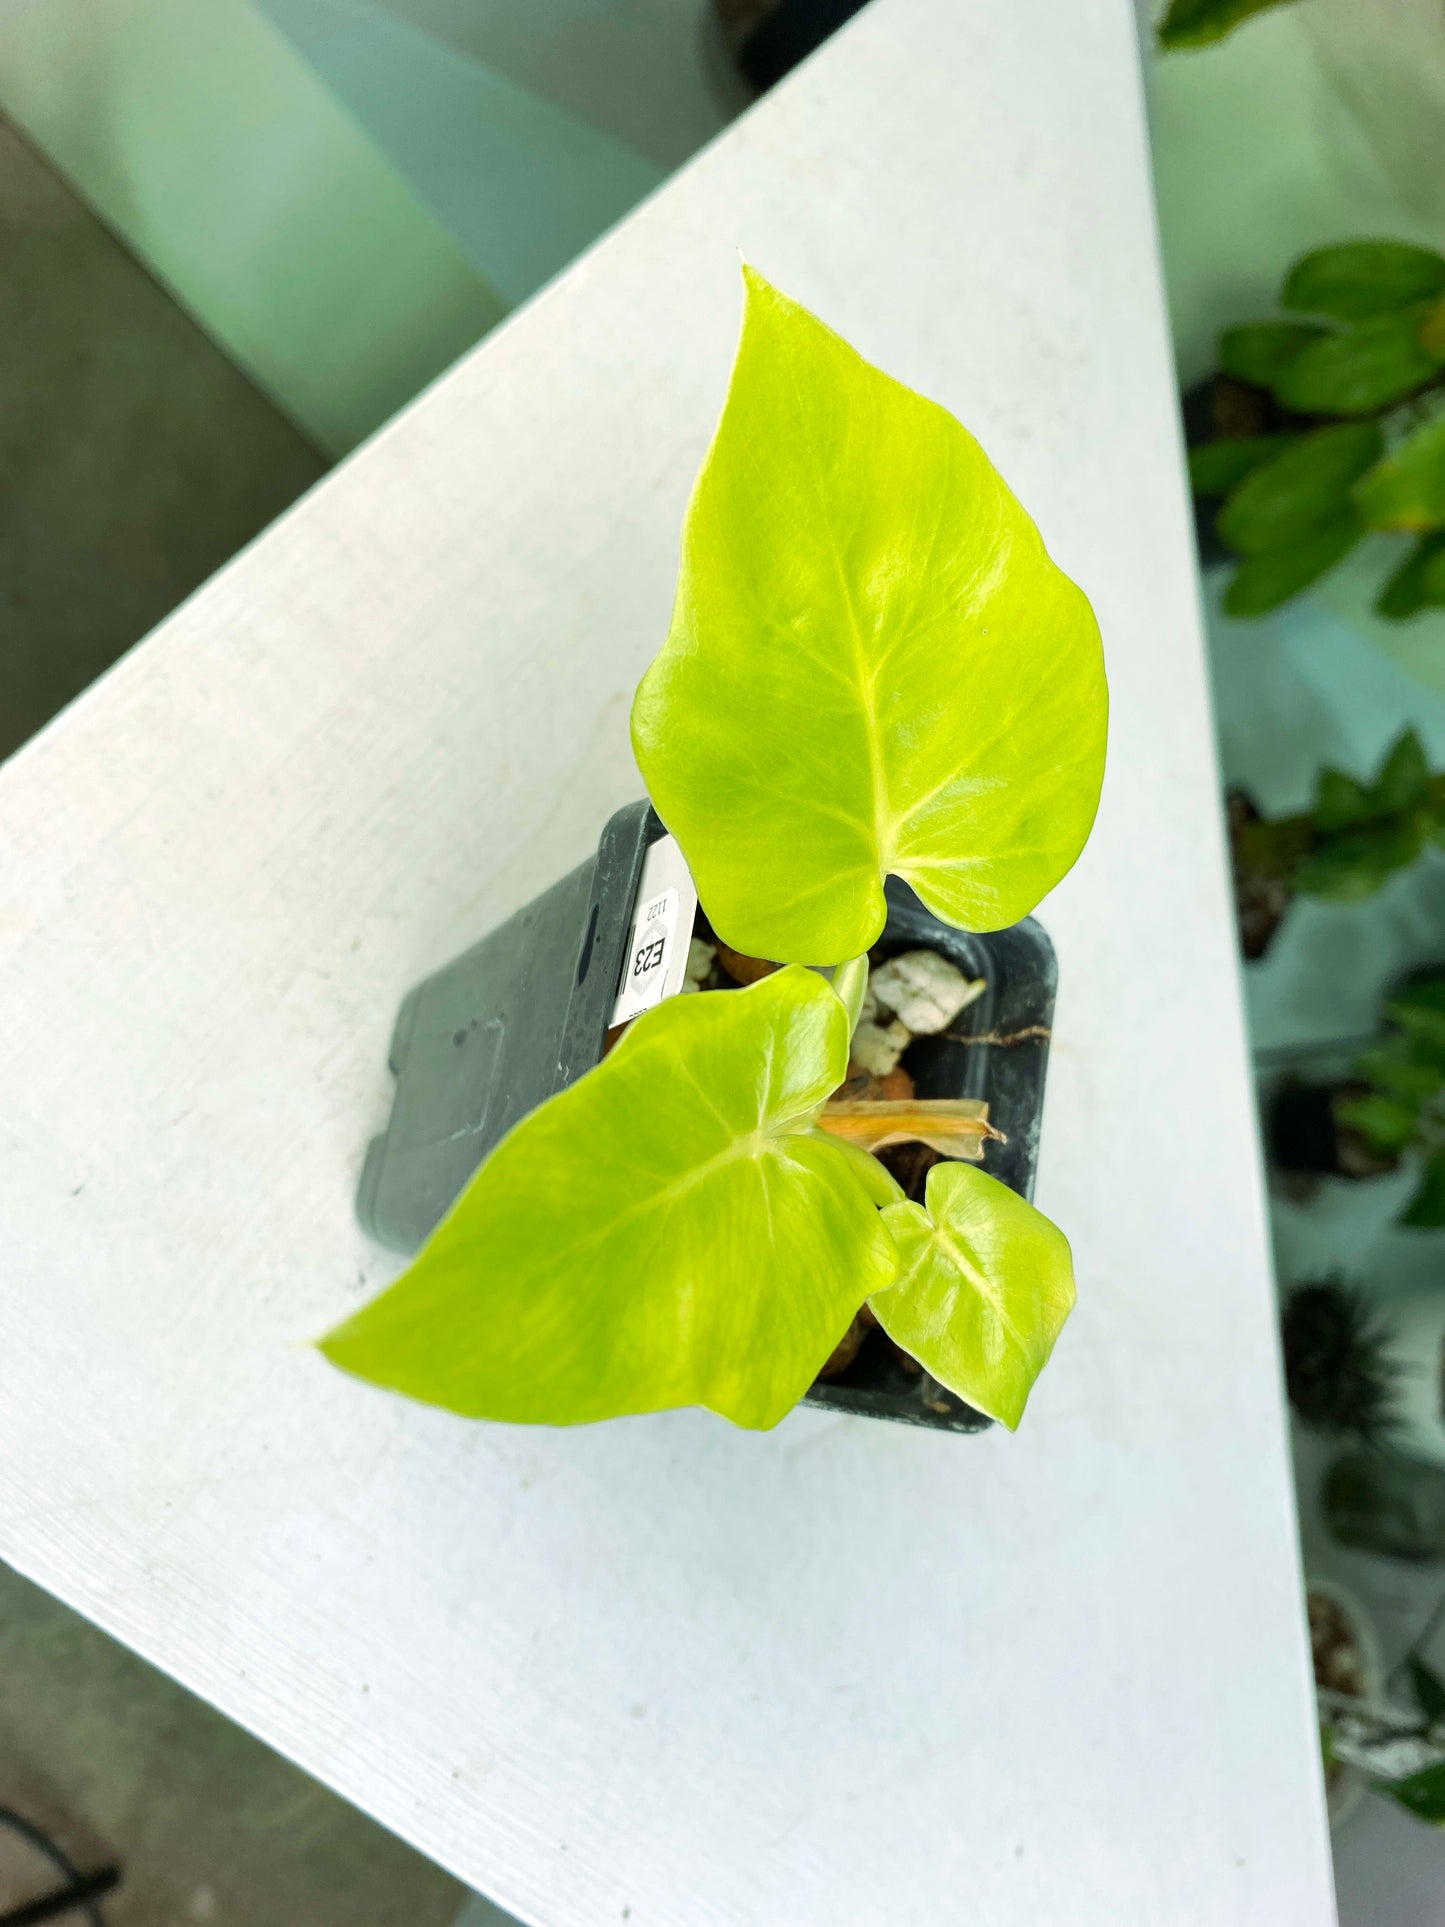 Philodendron warscewiczii "Aurea Flavum" (3:E23) [1122] | US Seller | Exact Plant | In-Stock